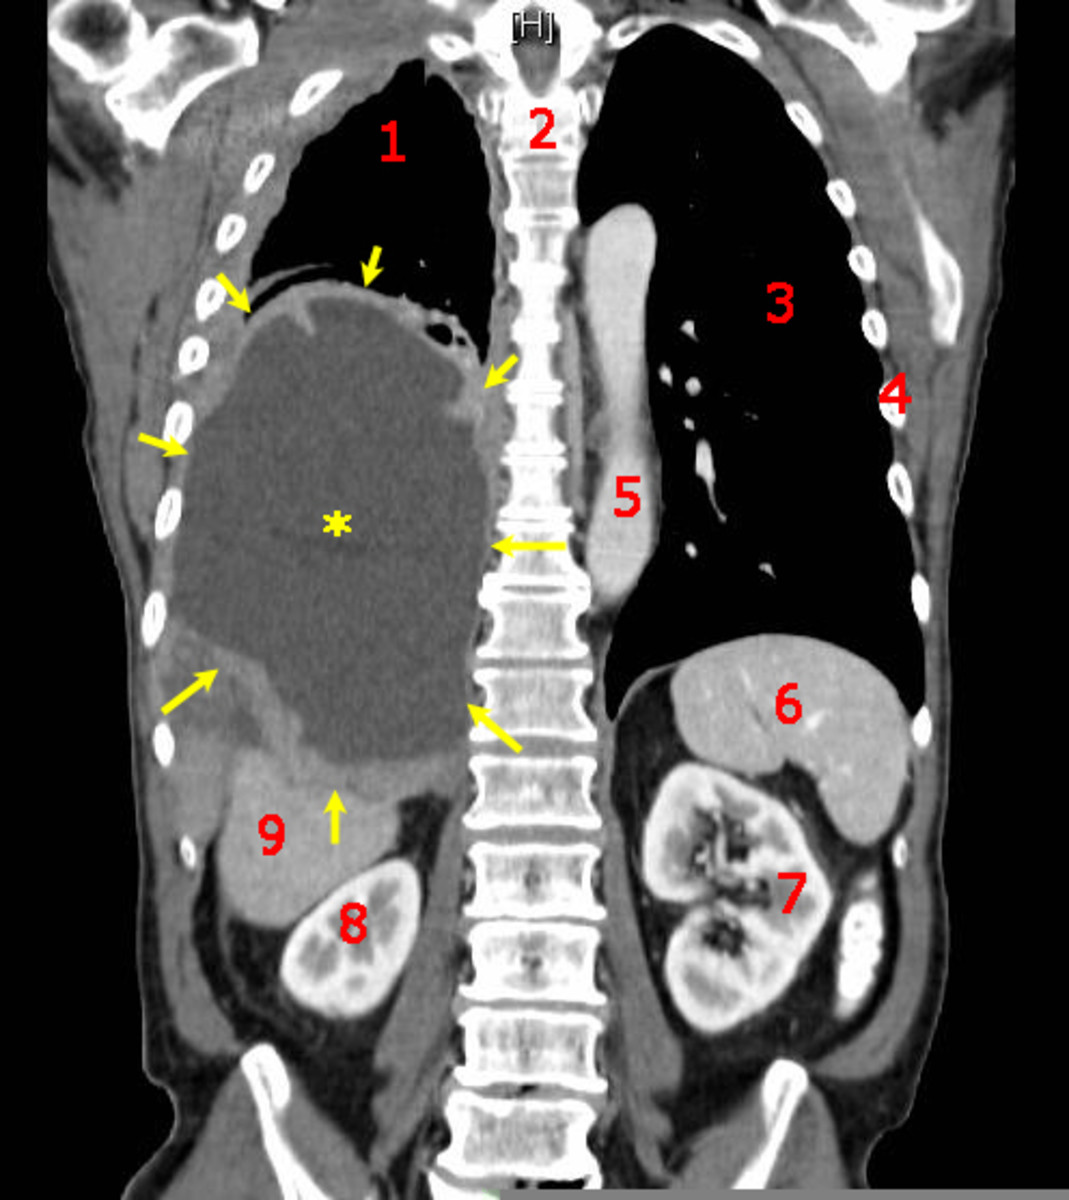 Malignant Mesothelioma, coronal CT scan.  Legend: the malignant mesothelioma is indicated by yellow arrows, the central pleural effusion is marked with a yellow star. (1) right lung, (2) spine, (3) left lung, (4) ribs, (5) aorta, (6) spleen, (7) left